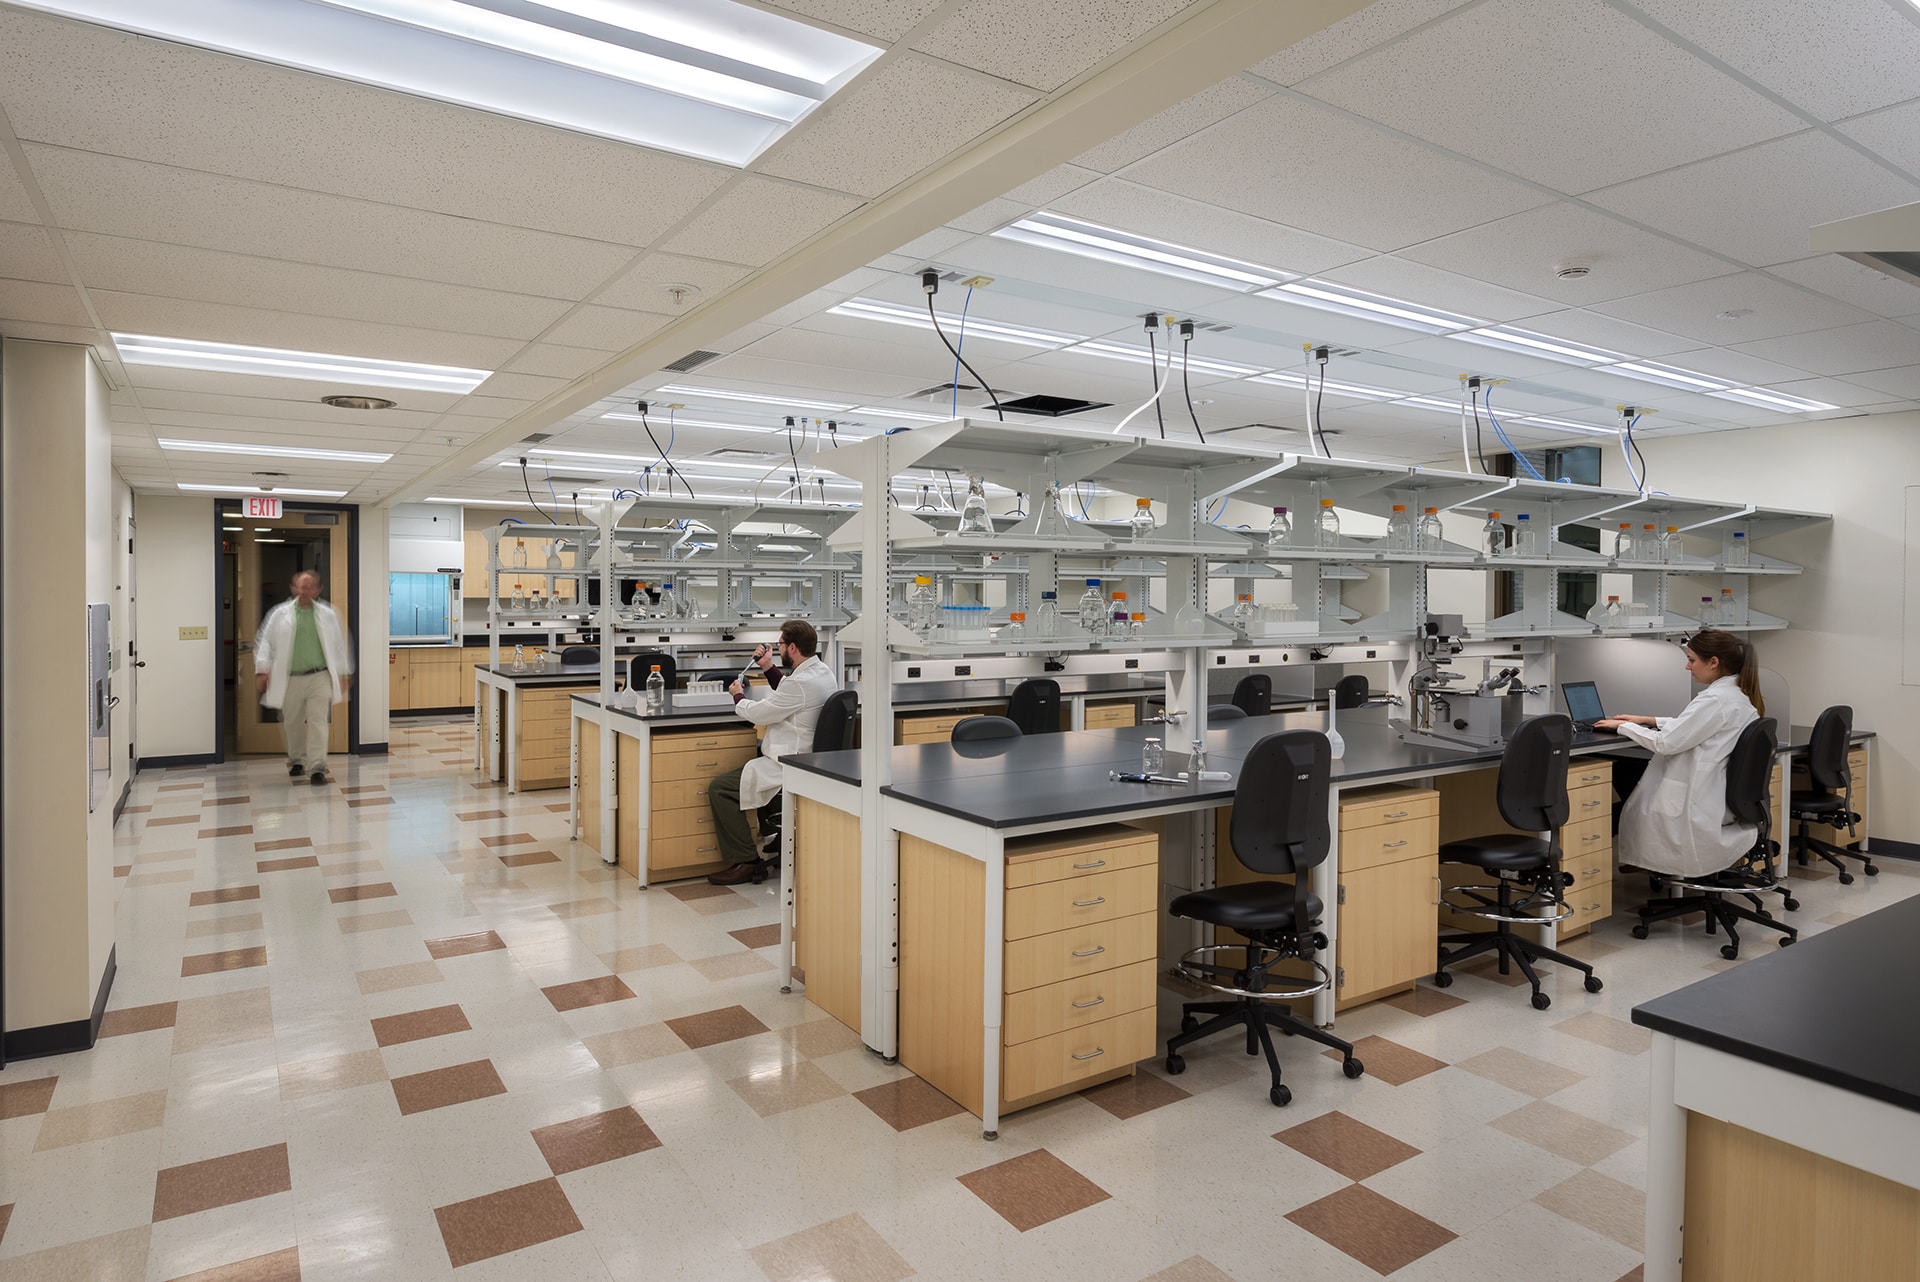 washington university school lab designed by trivers architectural firm